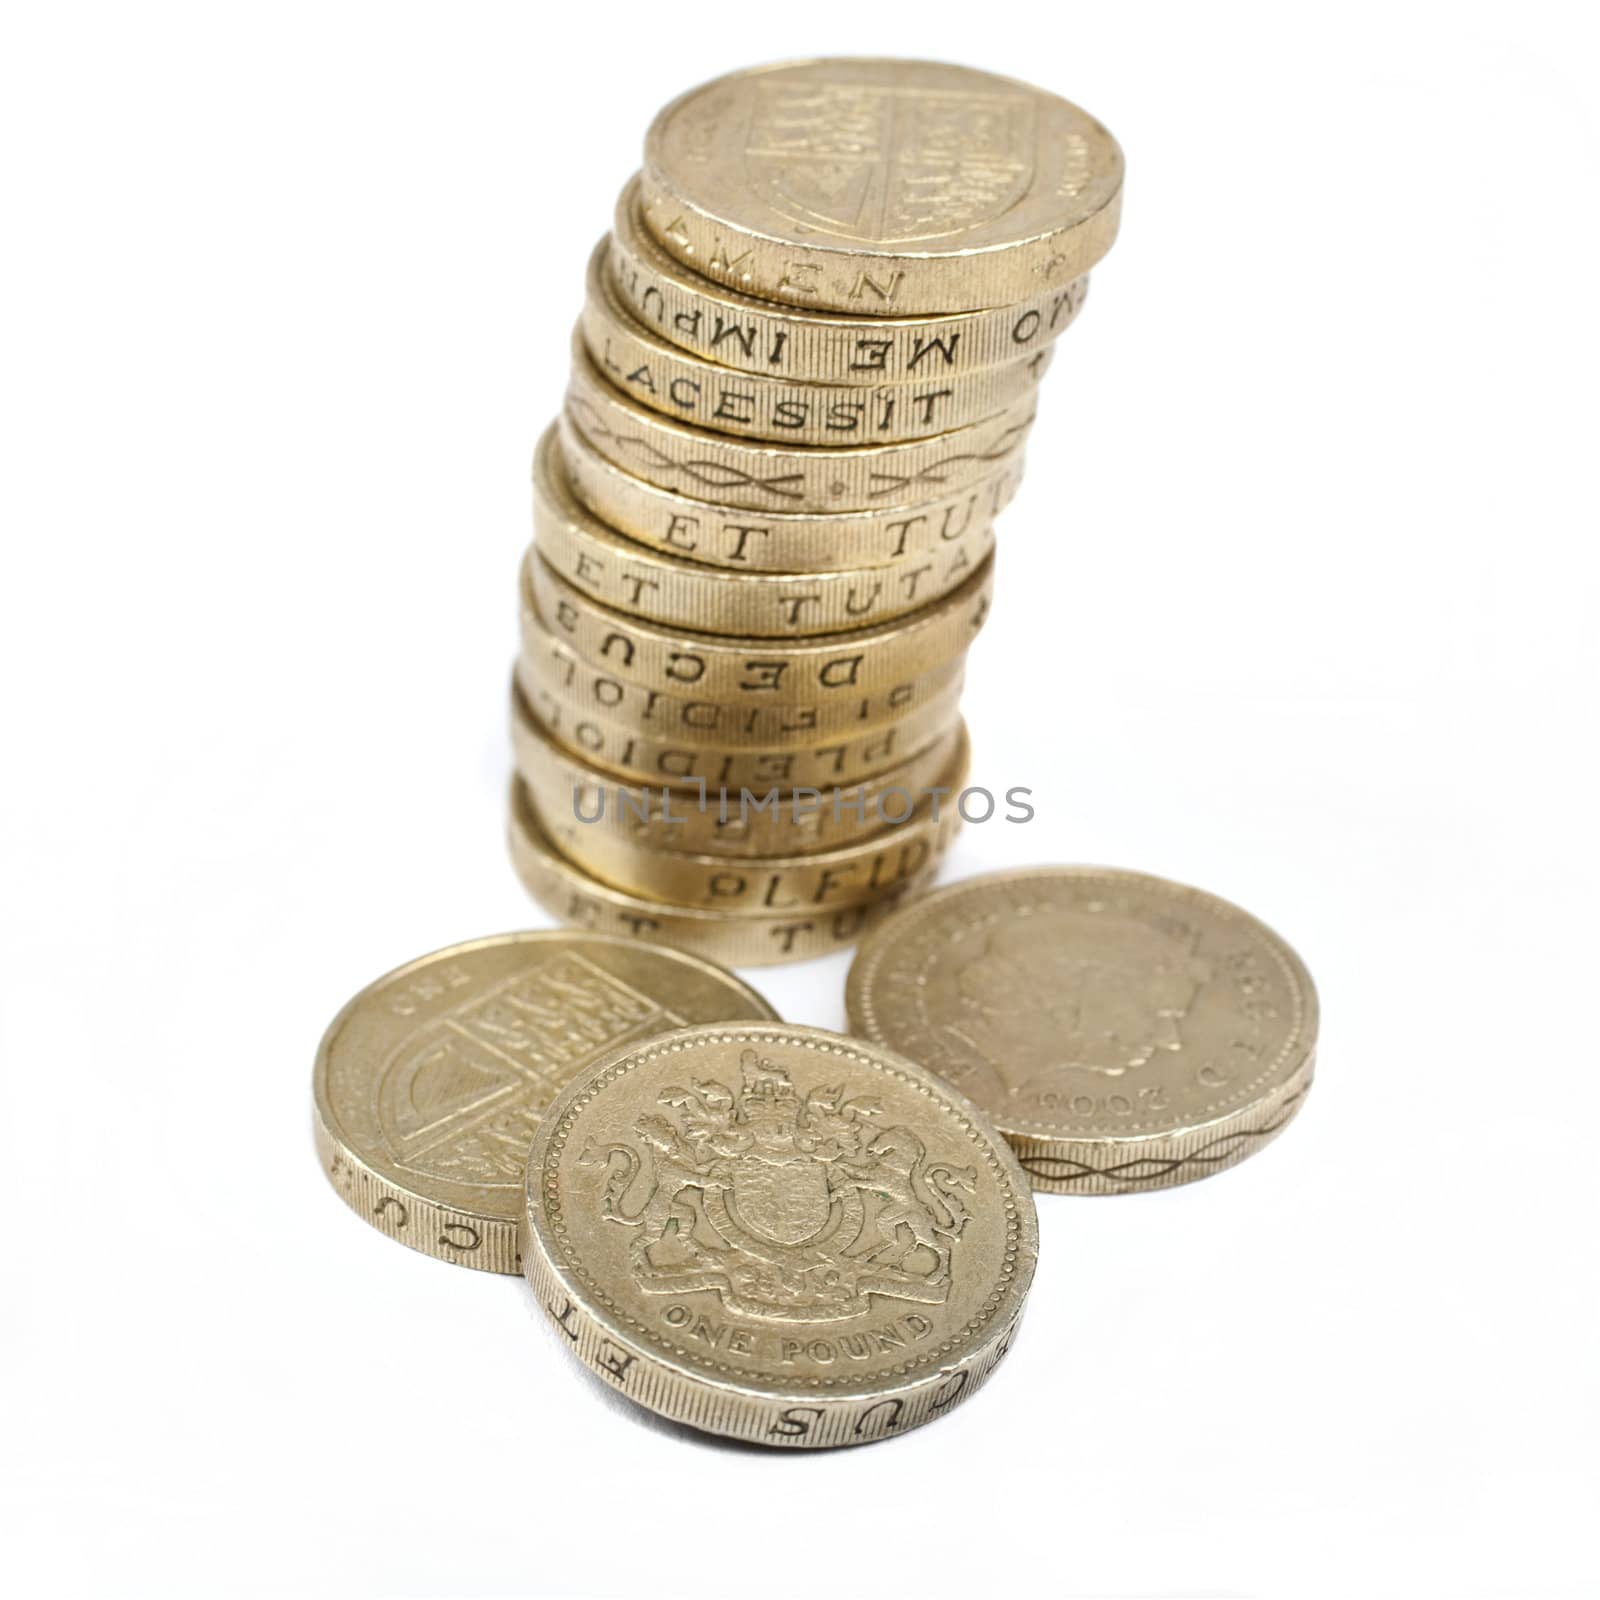 One Pound coins on a white background.